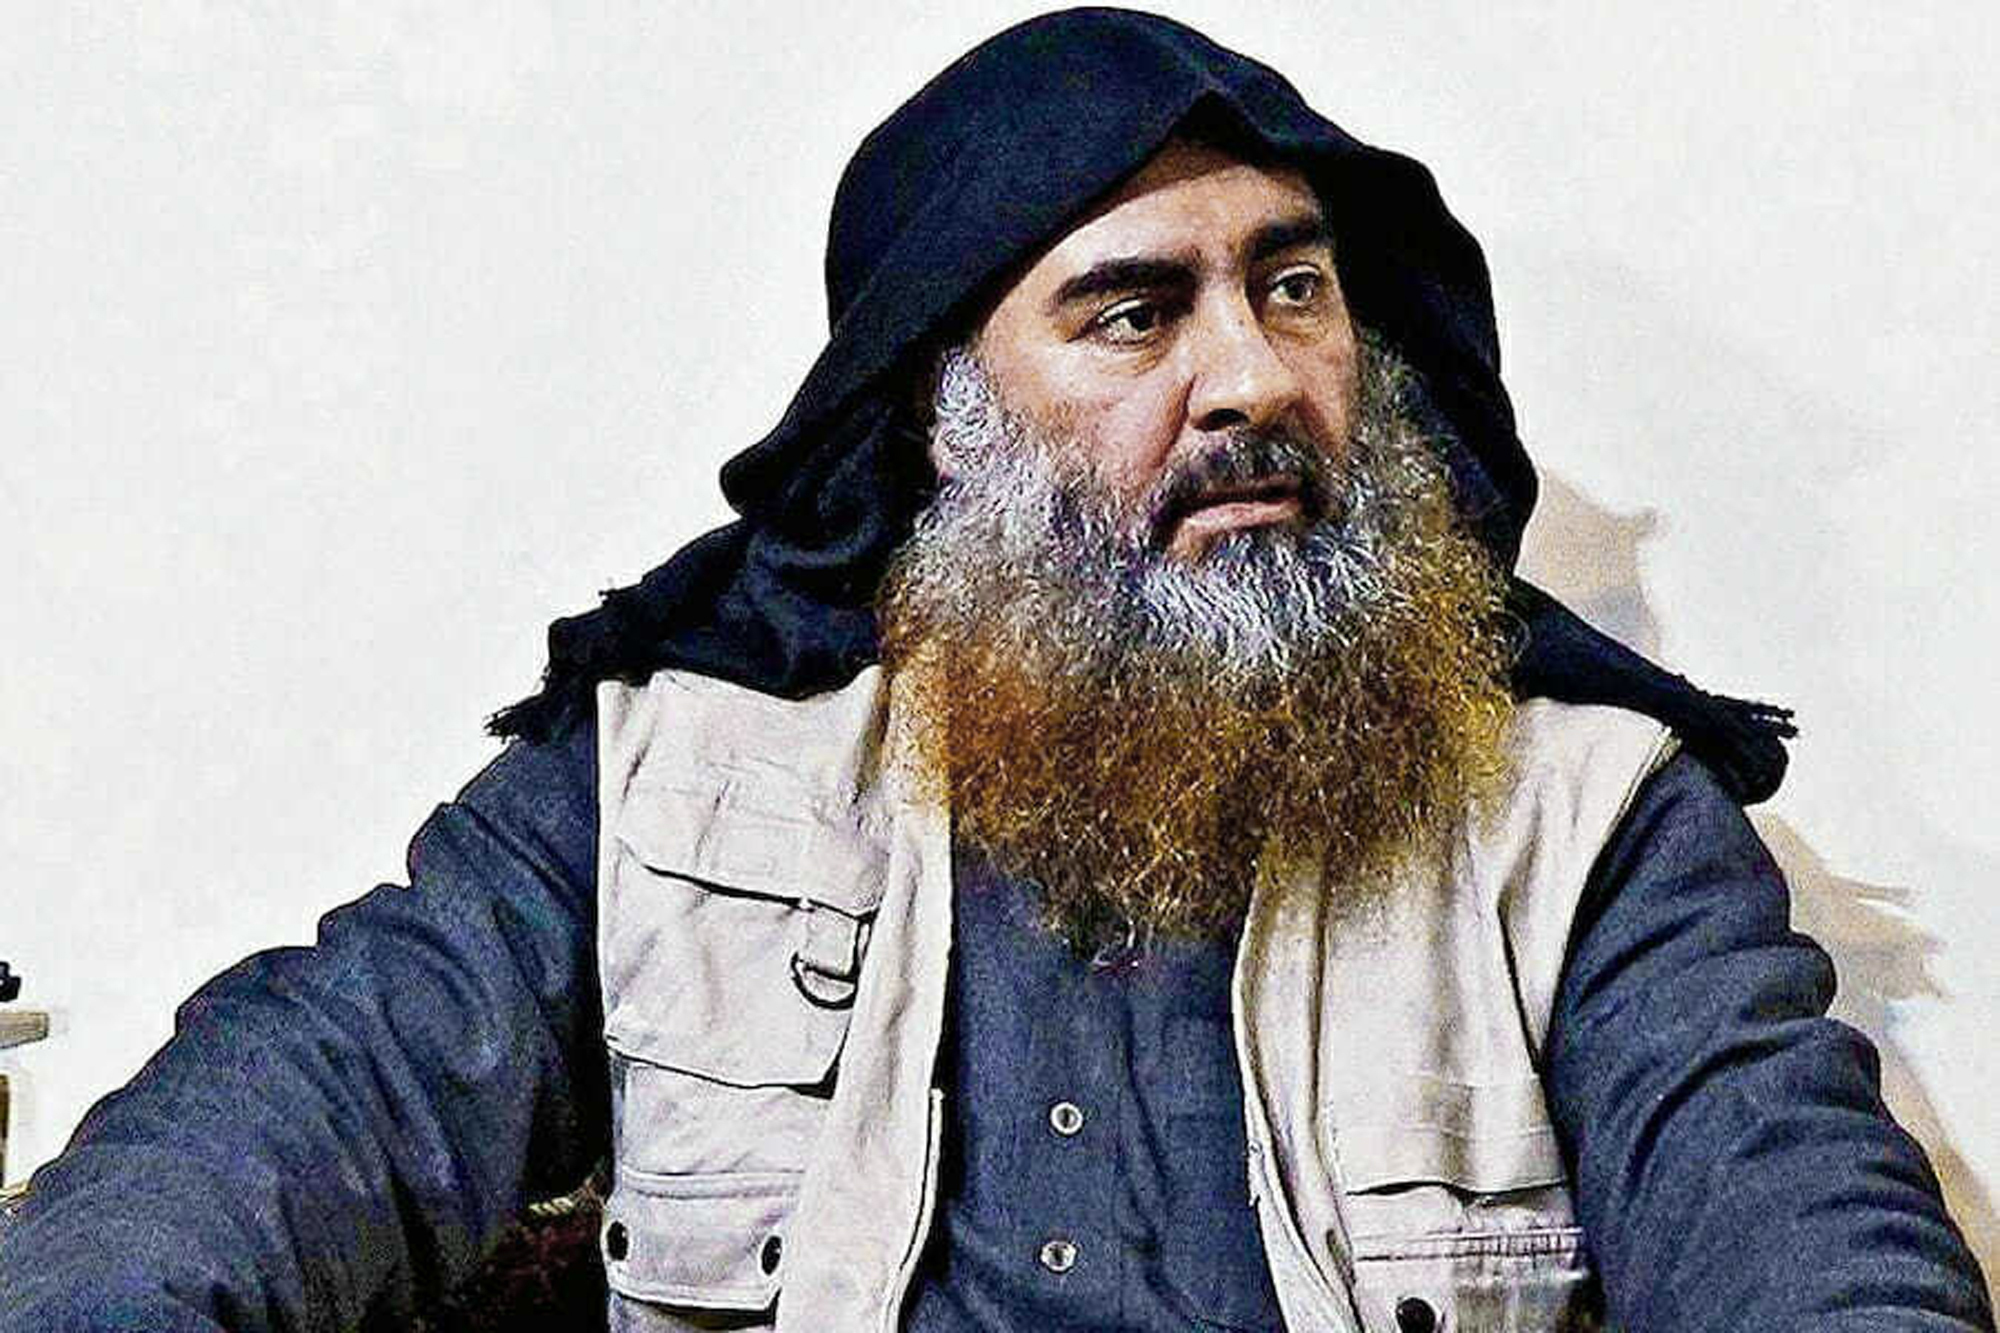 PHOTO: This file image released by the Department of Defense on Wednesday, Oct. 30, 2019, and displayed at a Pentagon briefing, shows an image of Islamic State leader Abu Bakr al-Baghdadi.